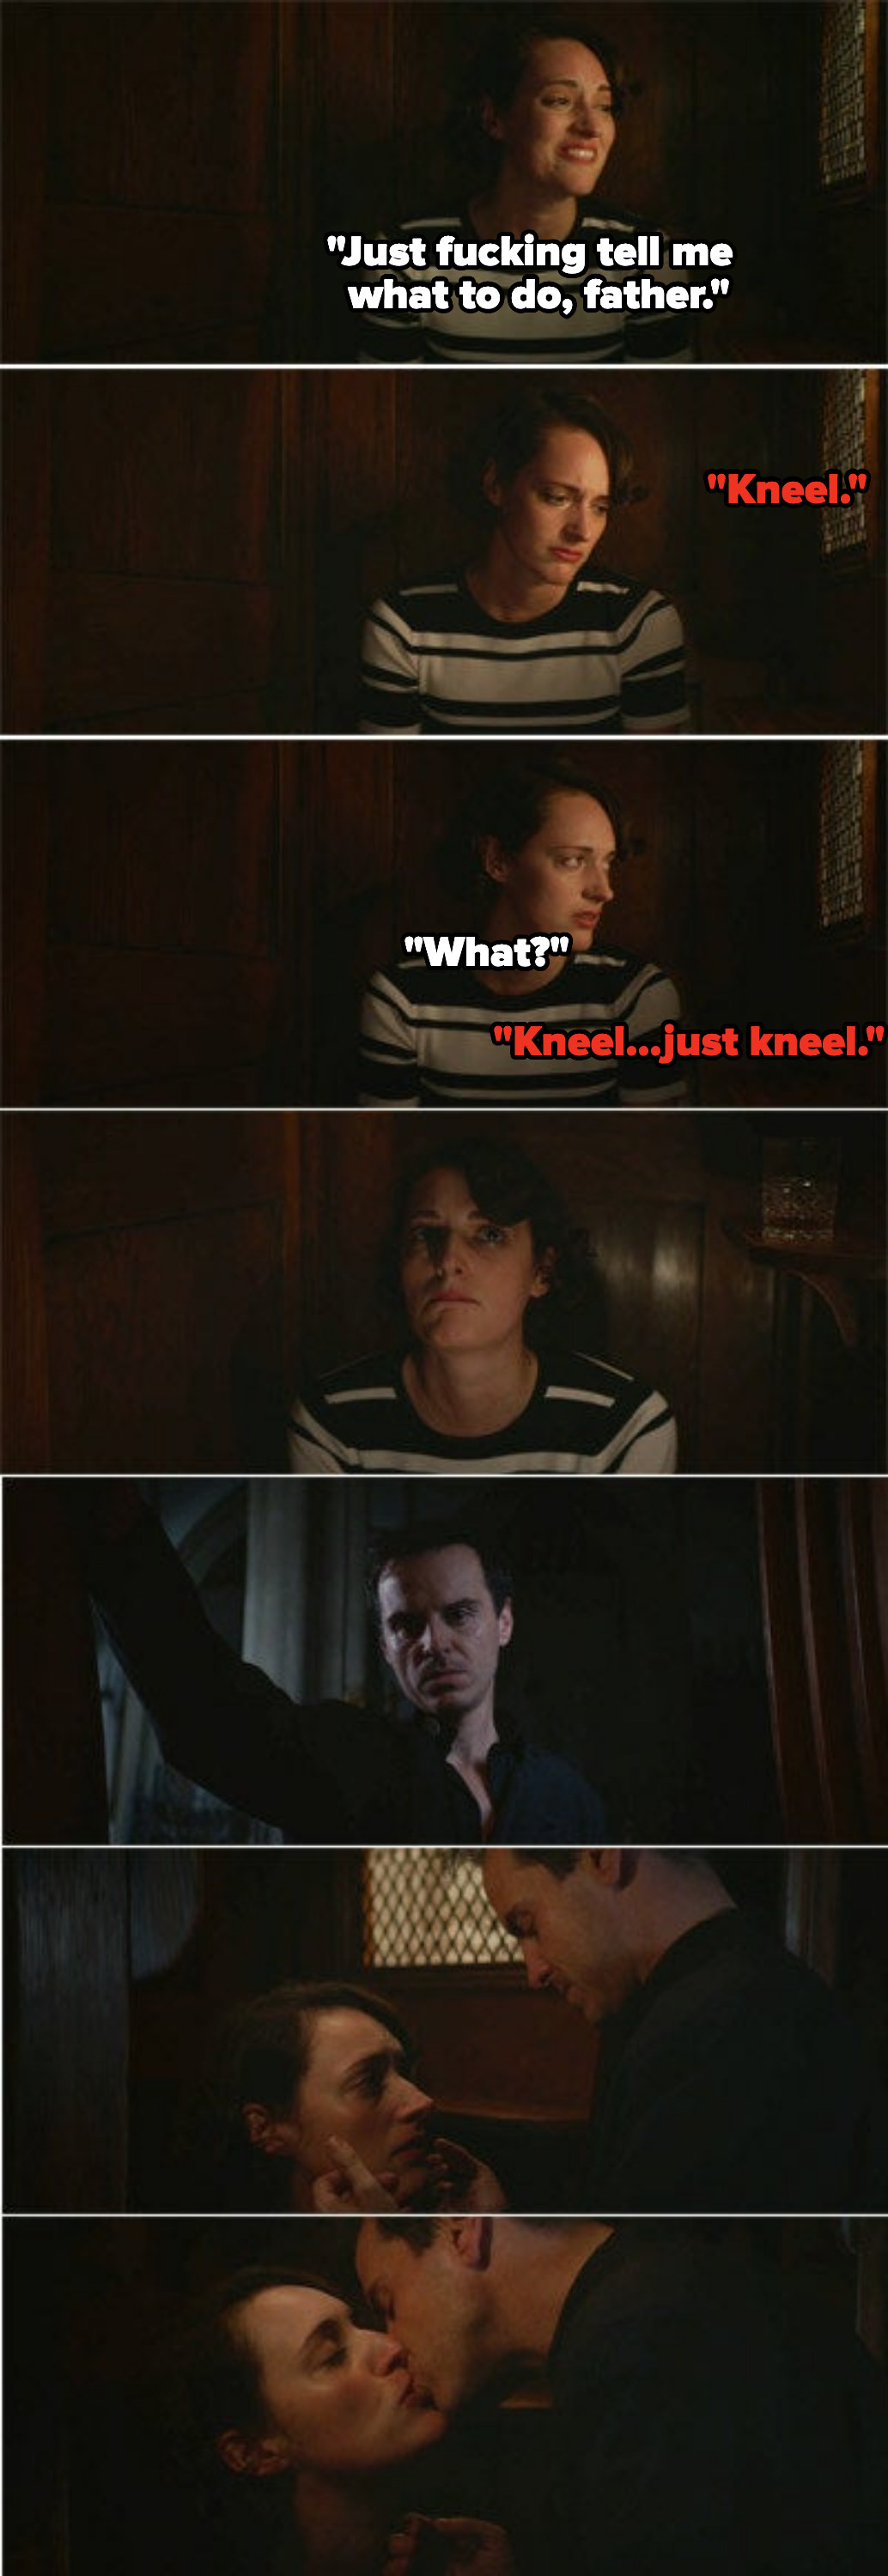 the priest tells Fleabag to kneel and then leaves the confessional to give her a kiss